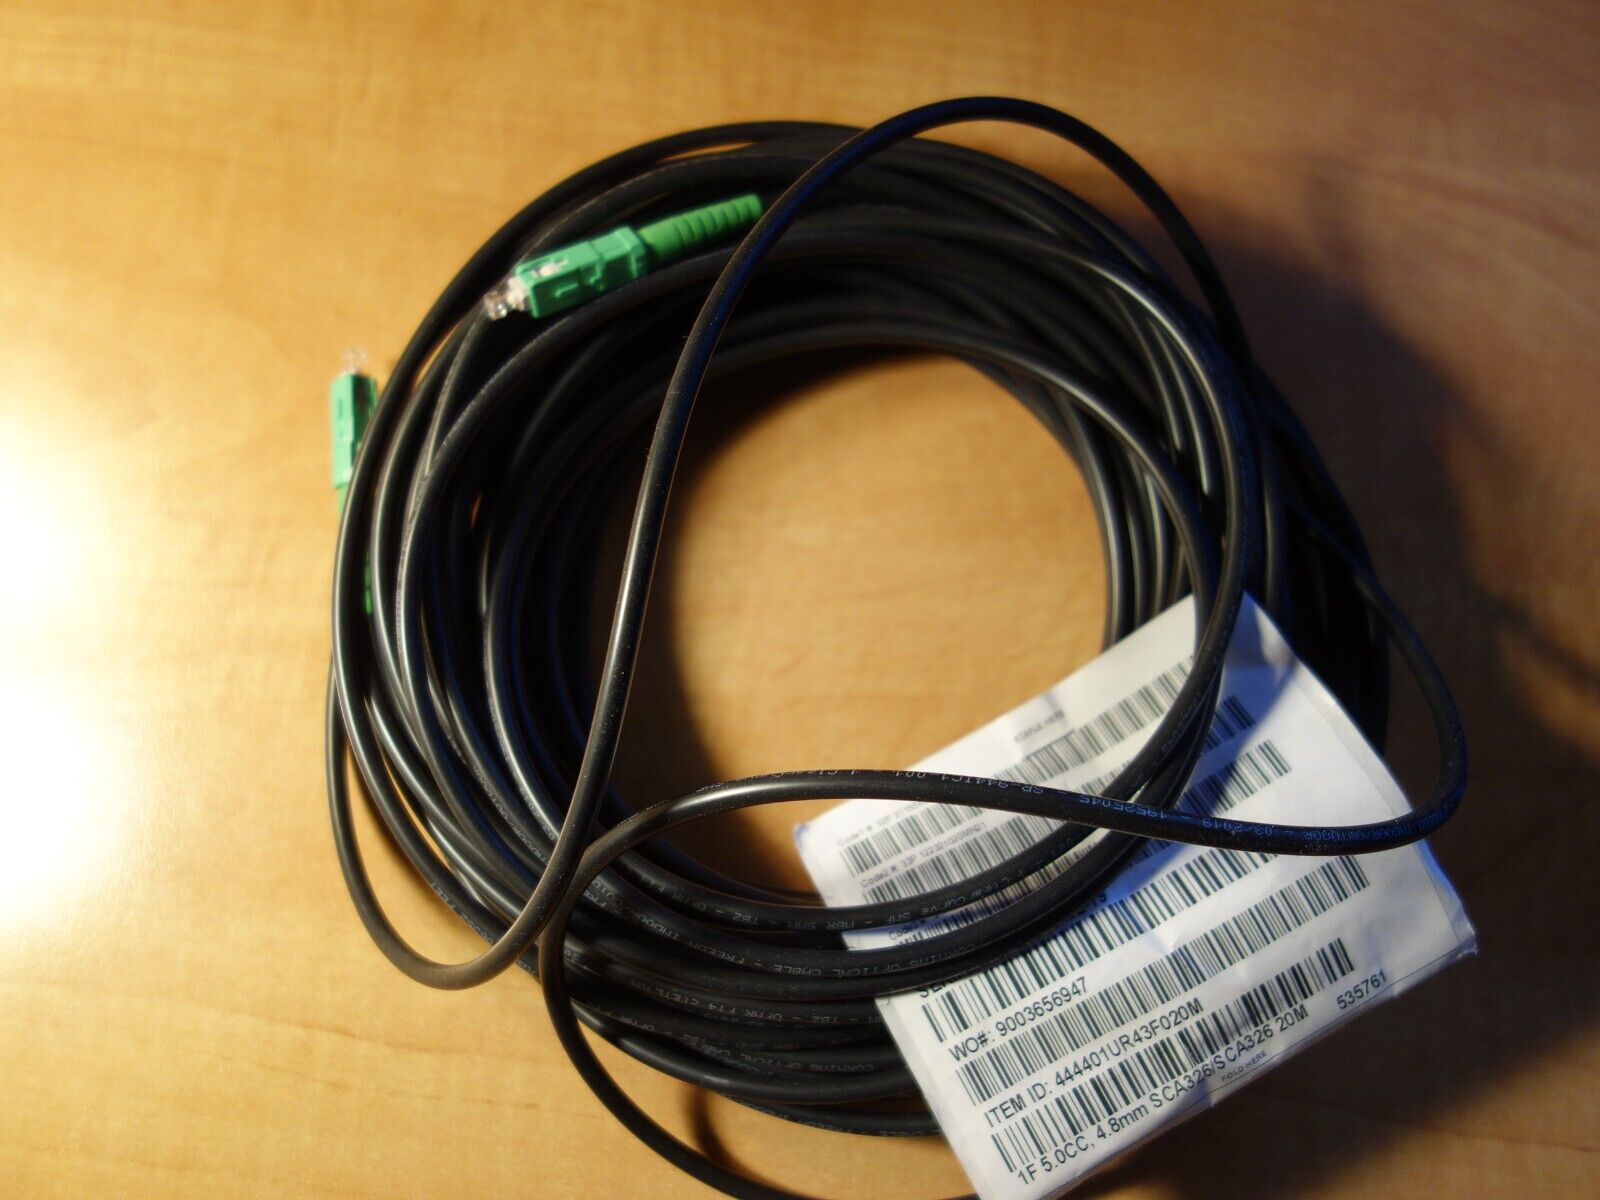 CORNING OPTICAL CABLE 20M, INDOOR / OUTDOOR, MBR 5mm, NEW.